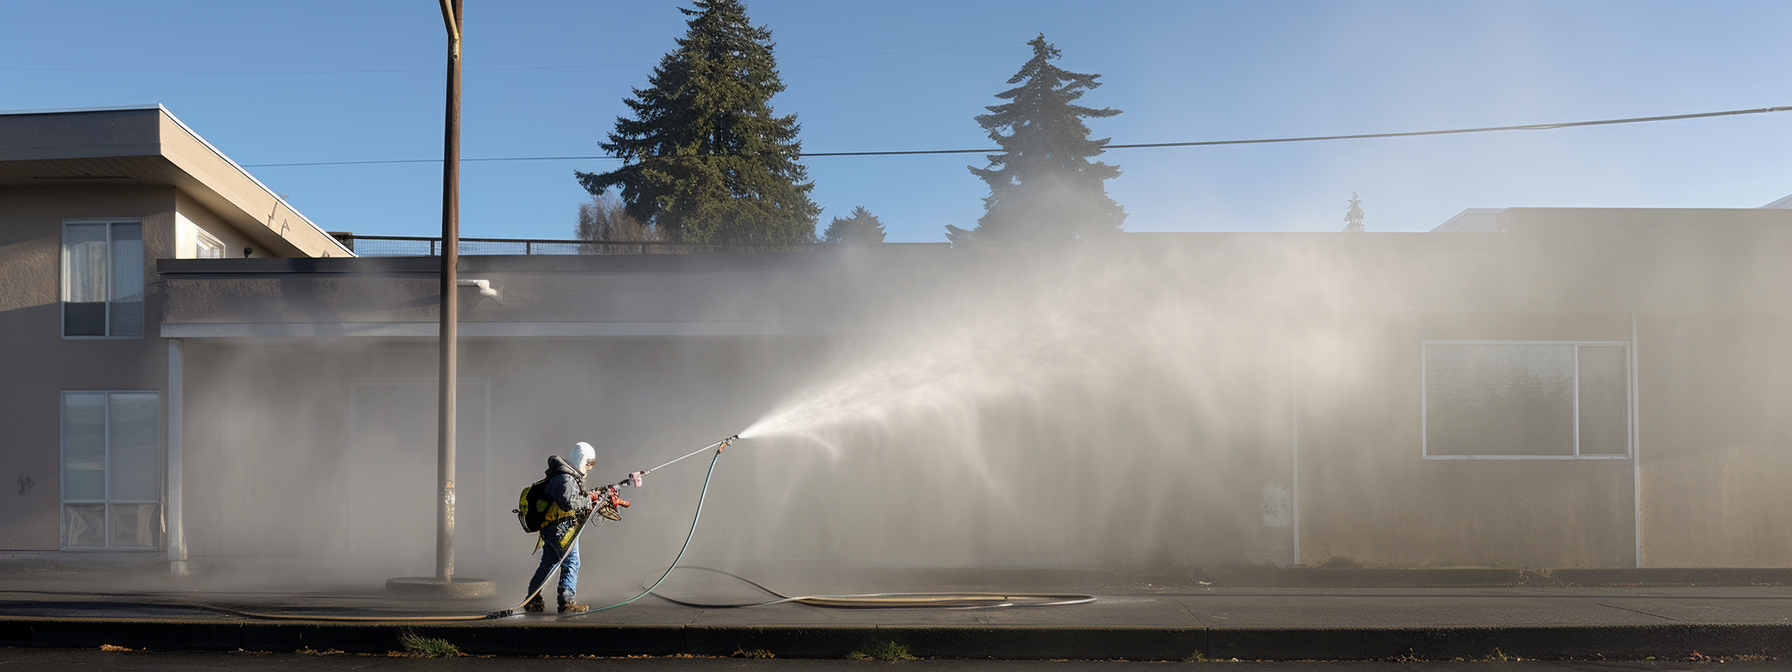 a person using a spray foam gun in front of a vancouver, wa building with marketing keywords displayed around them.